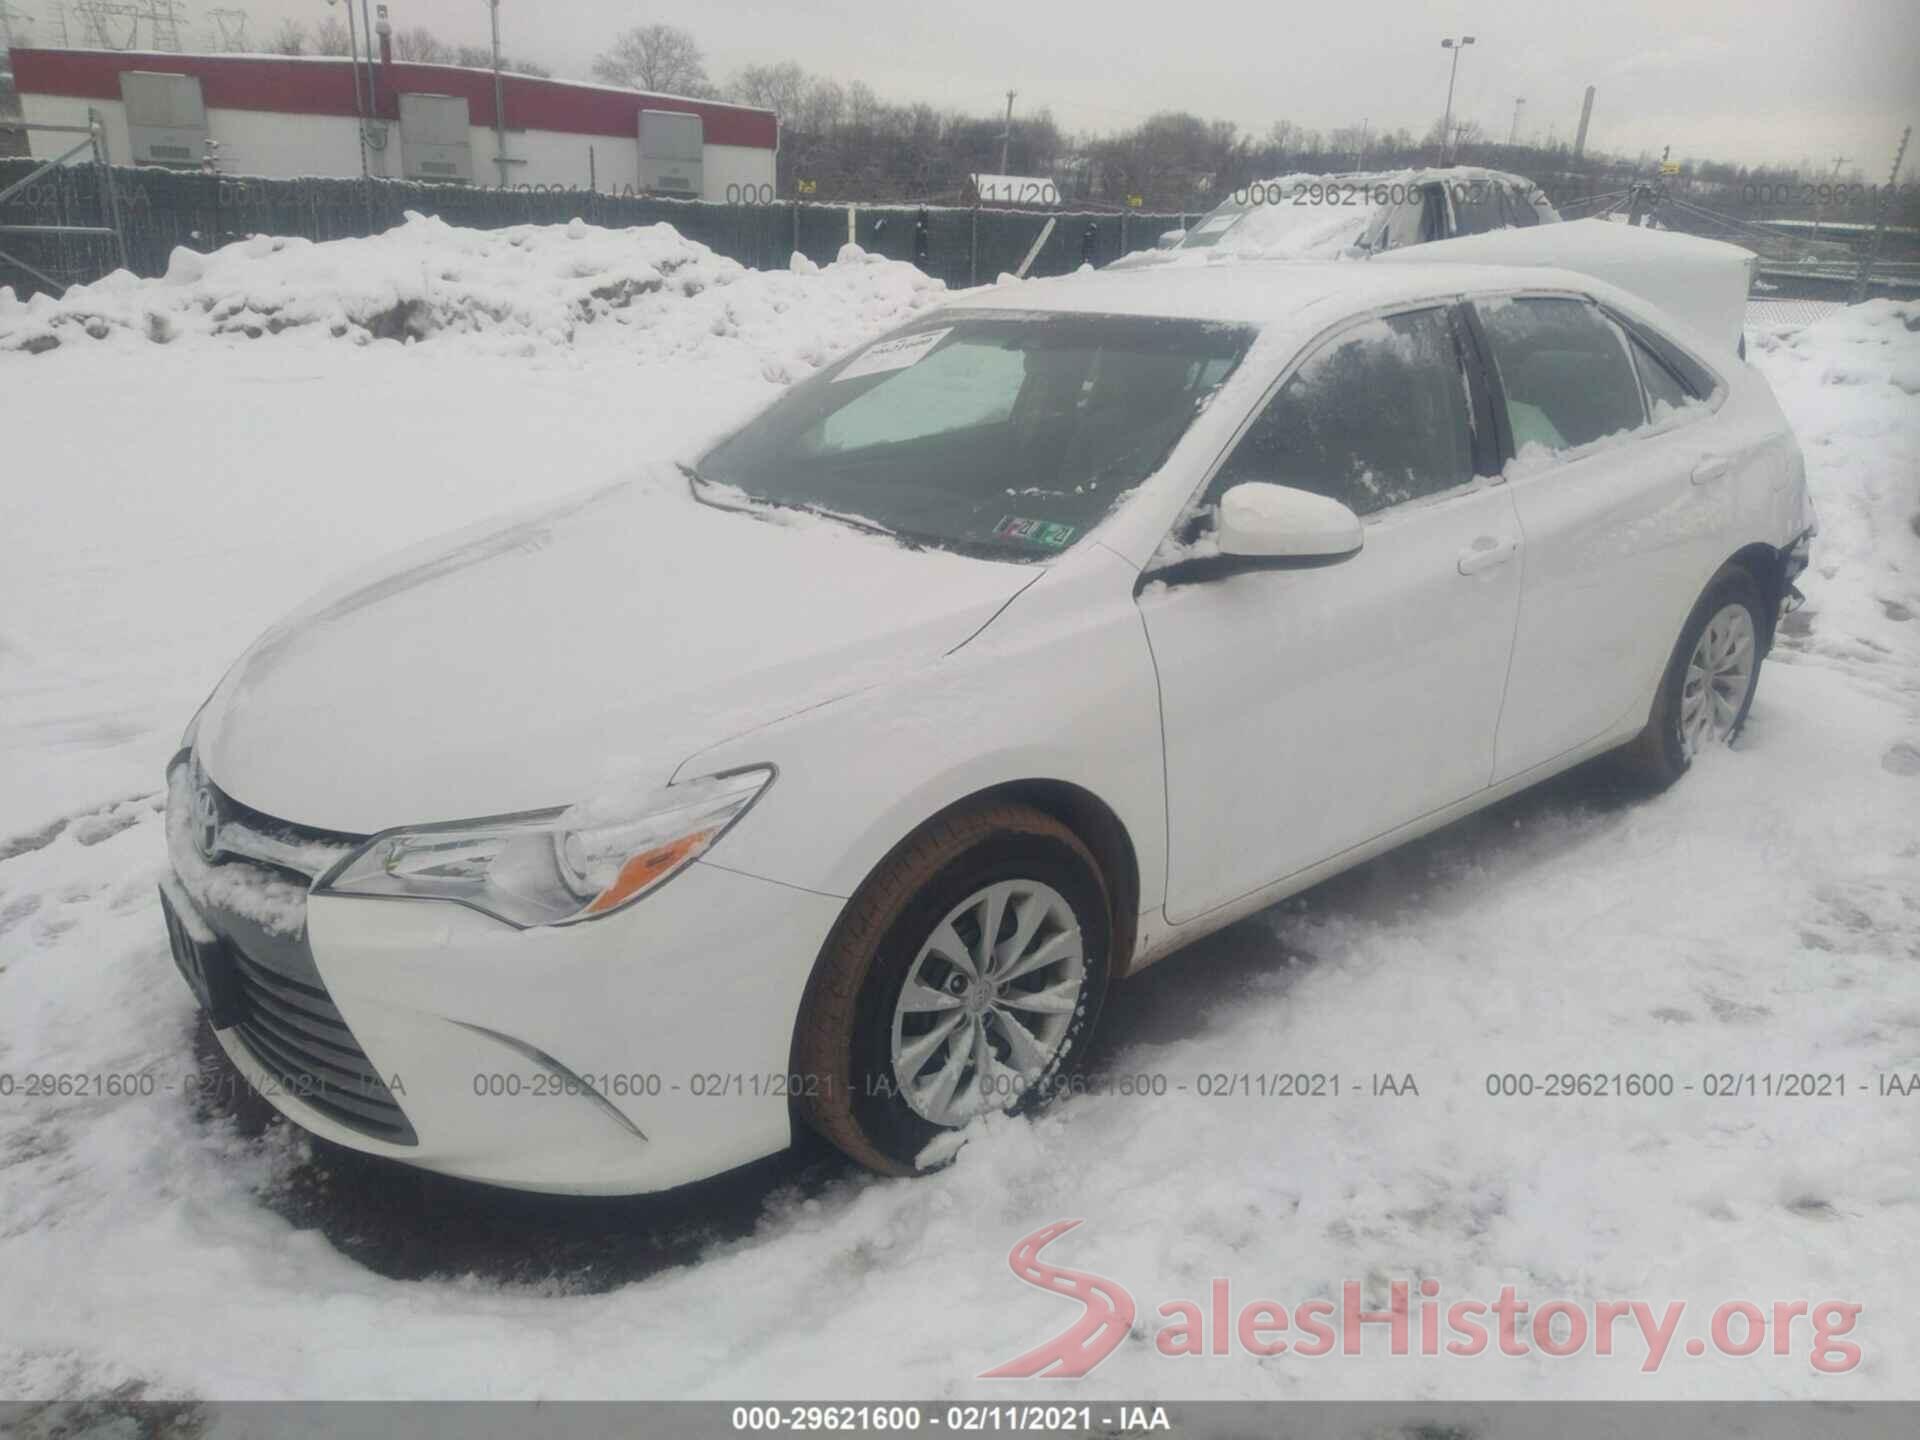 4T4BF1FK1GR578134 2016 TOYOTA CAMRY